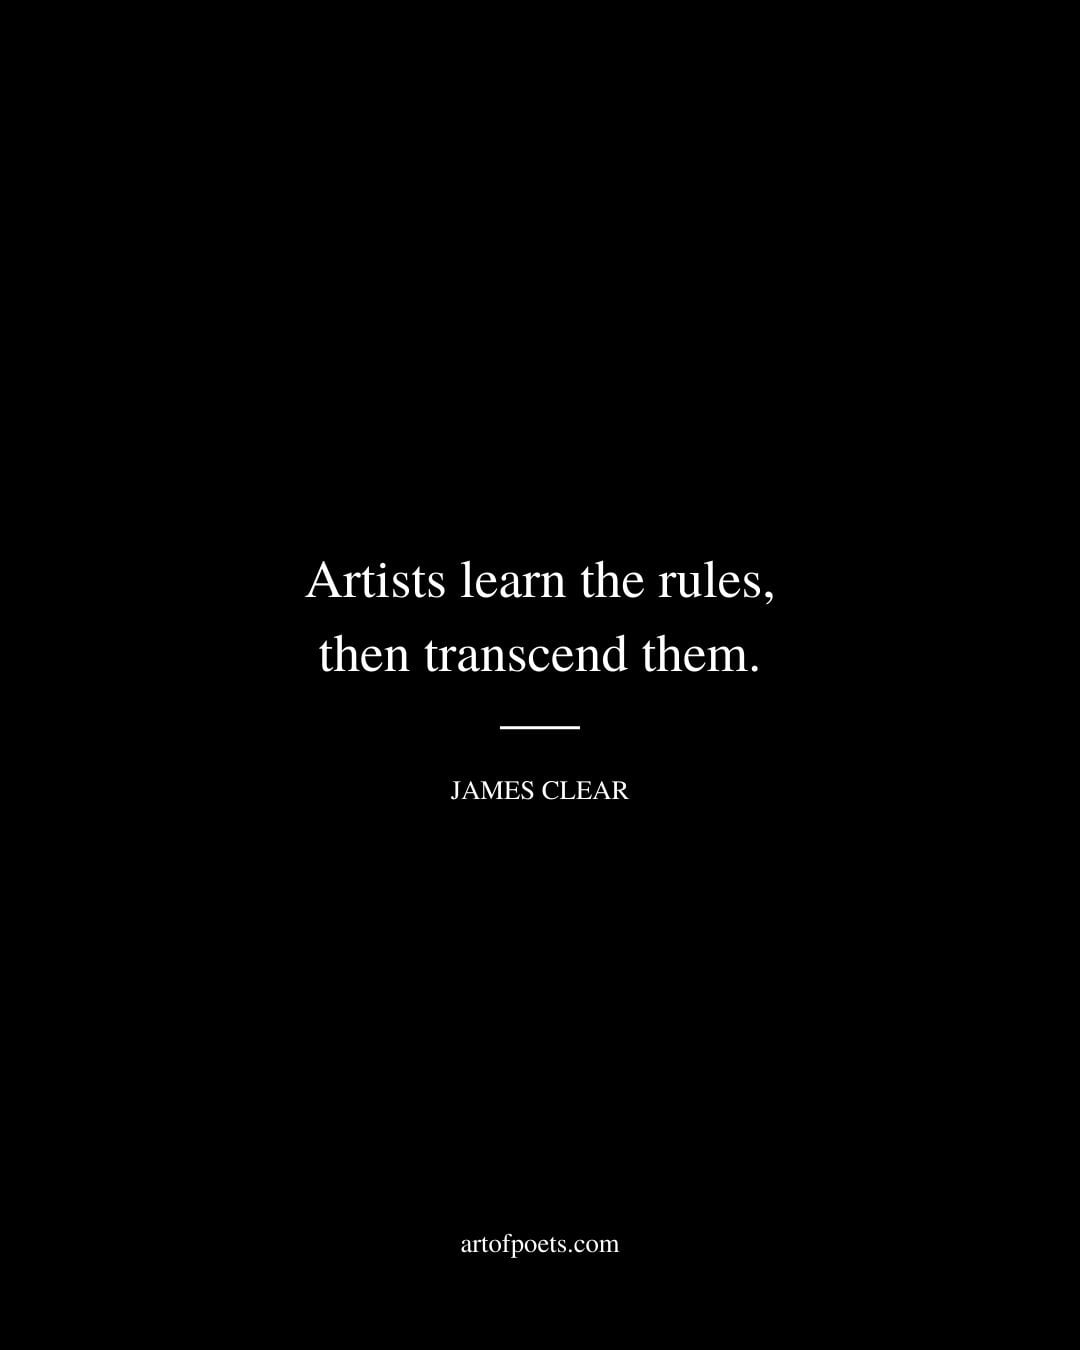 Artists learn the rules then transcend them